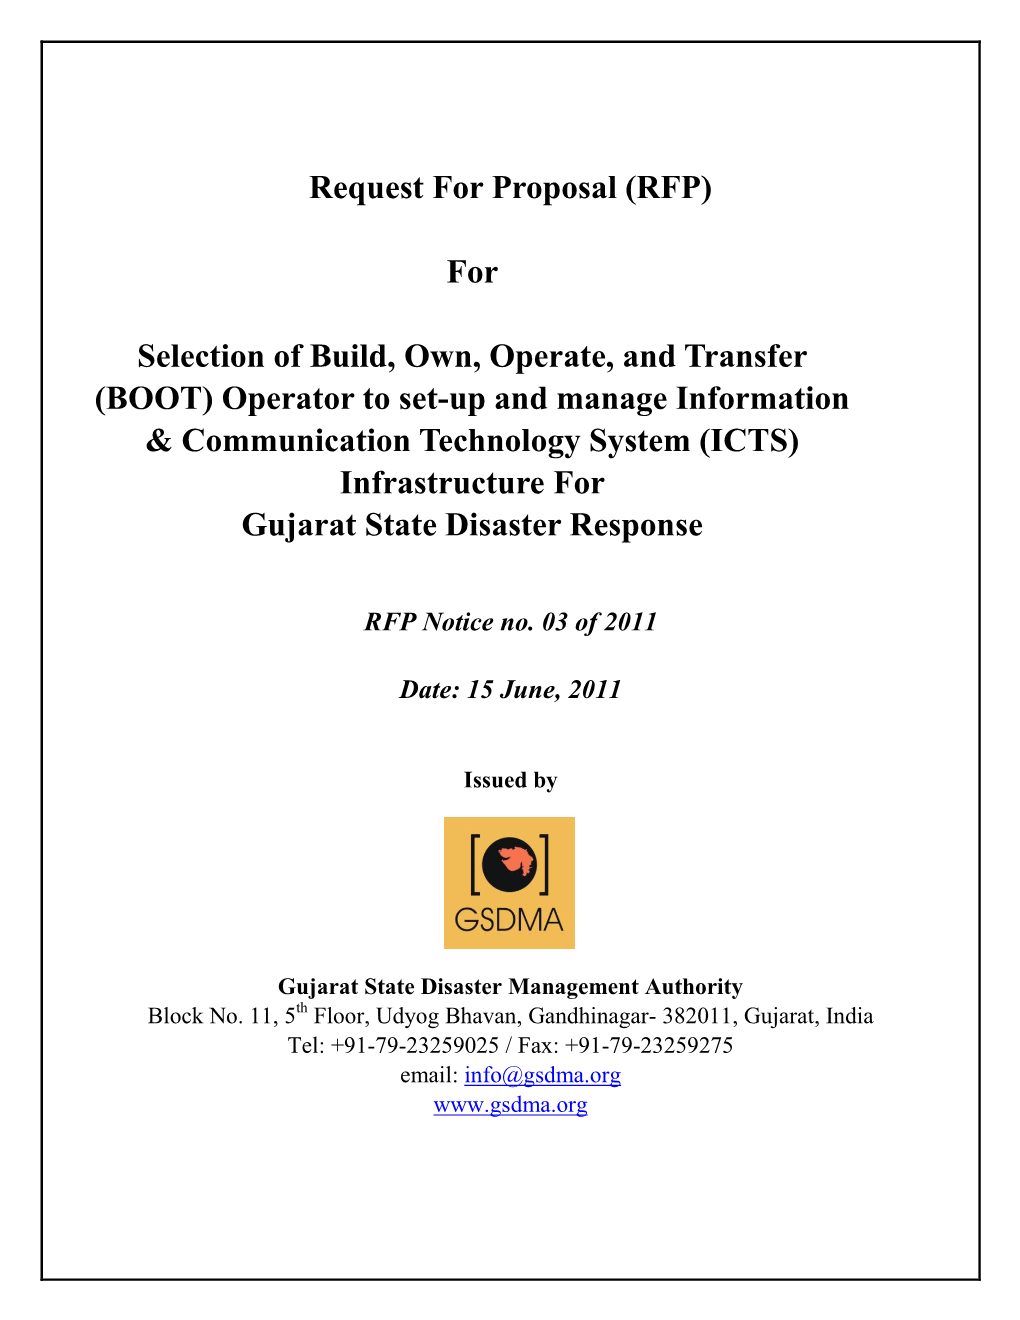 Request for Proposal (RFP)